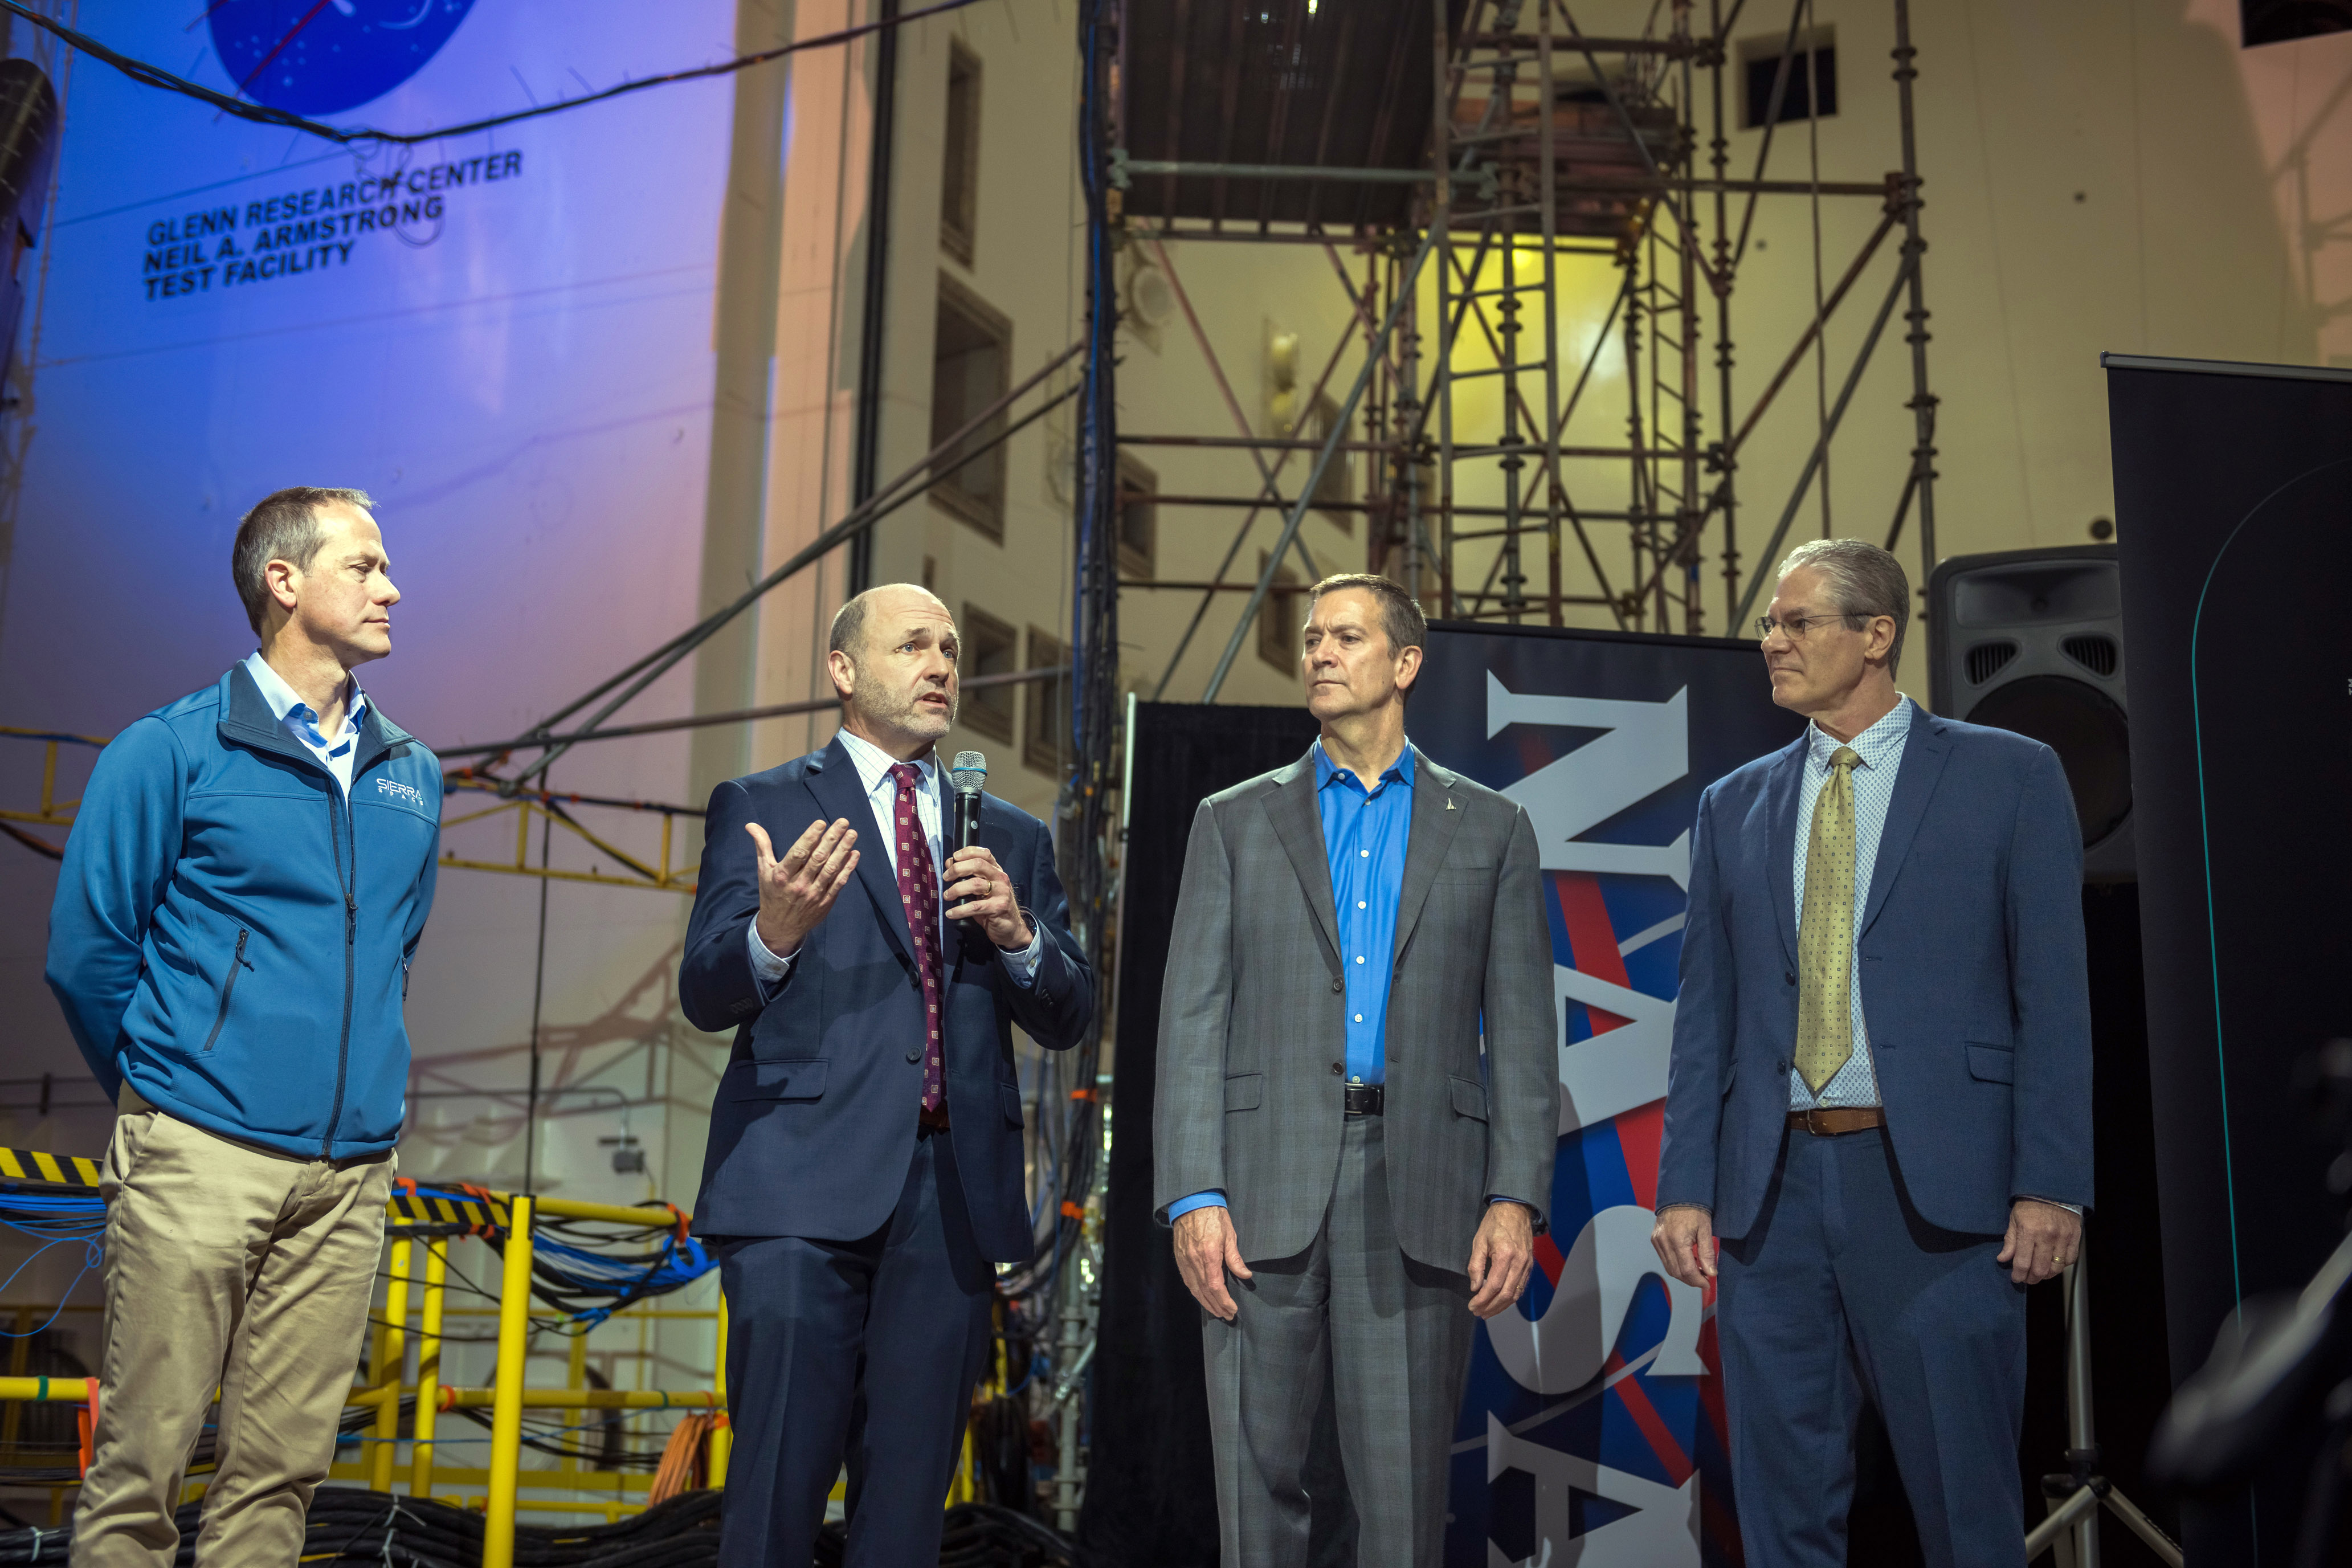 Four men stand inside the Mechanical Vibration Facility at NASA’s Neil Armstrong Test Facility. The three on the right are dressed in suits, and one to the far left is wearing khakis and a jacket that has a Sierra Space logo. They stand in front of a NASA banner, and one holds a microphone to address a crowd of media.